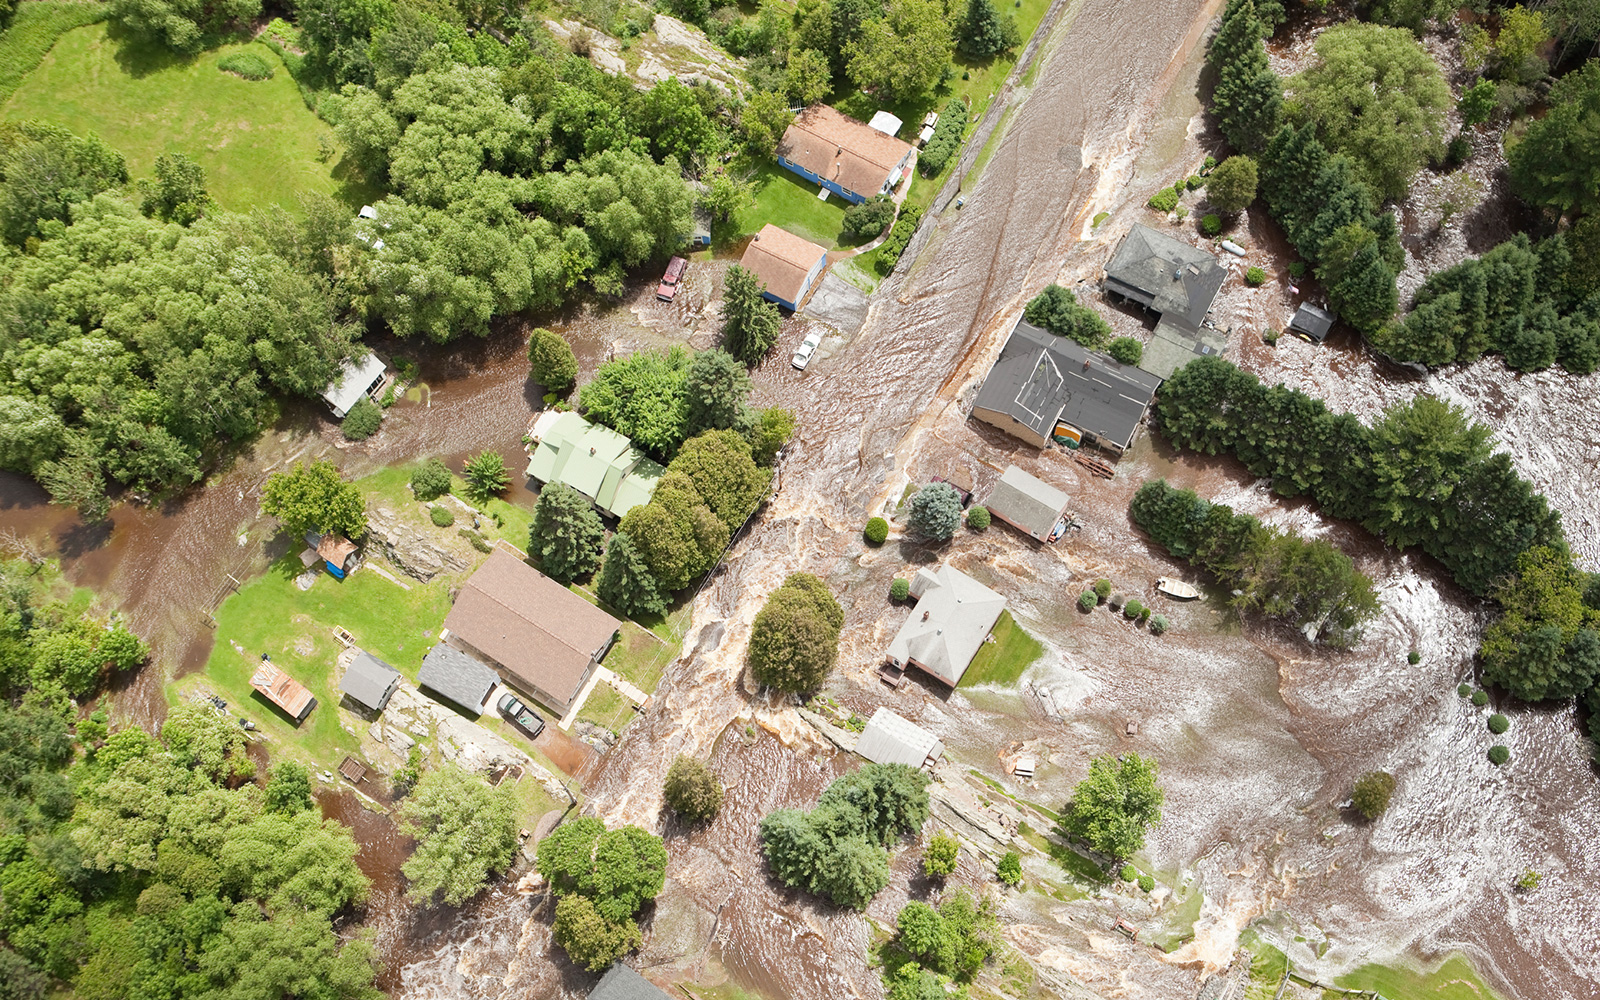 Aerial view of flood waters surging through local area with residential streets and homes.